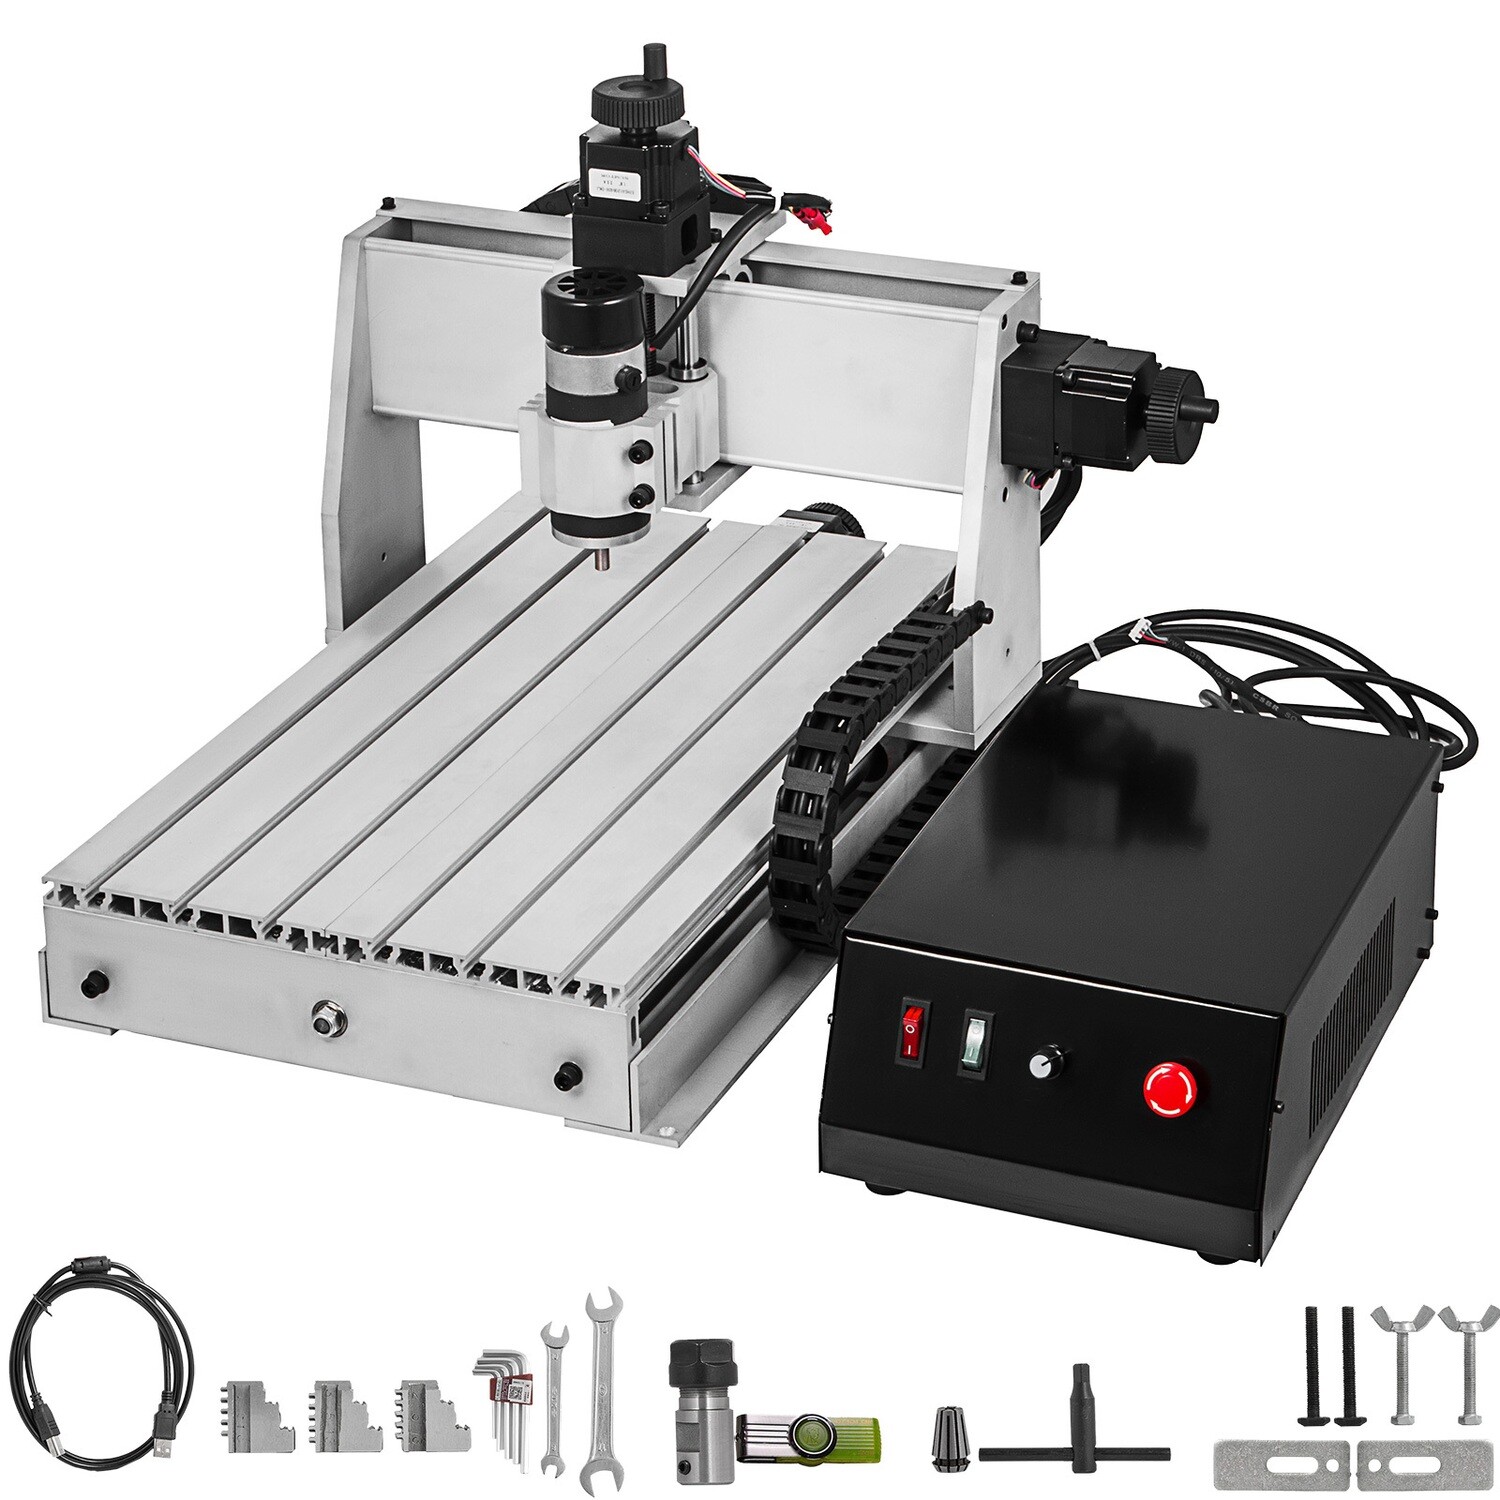 CNC Machine Router 3 Axis CNC Router Engraver Machine 500W CNC Router Engraving Drilling Milling Machine with Usb Port for DIY Artwork Cutter